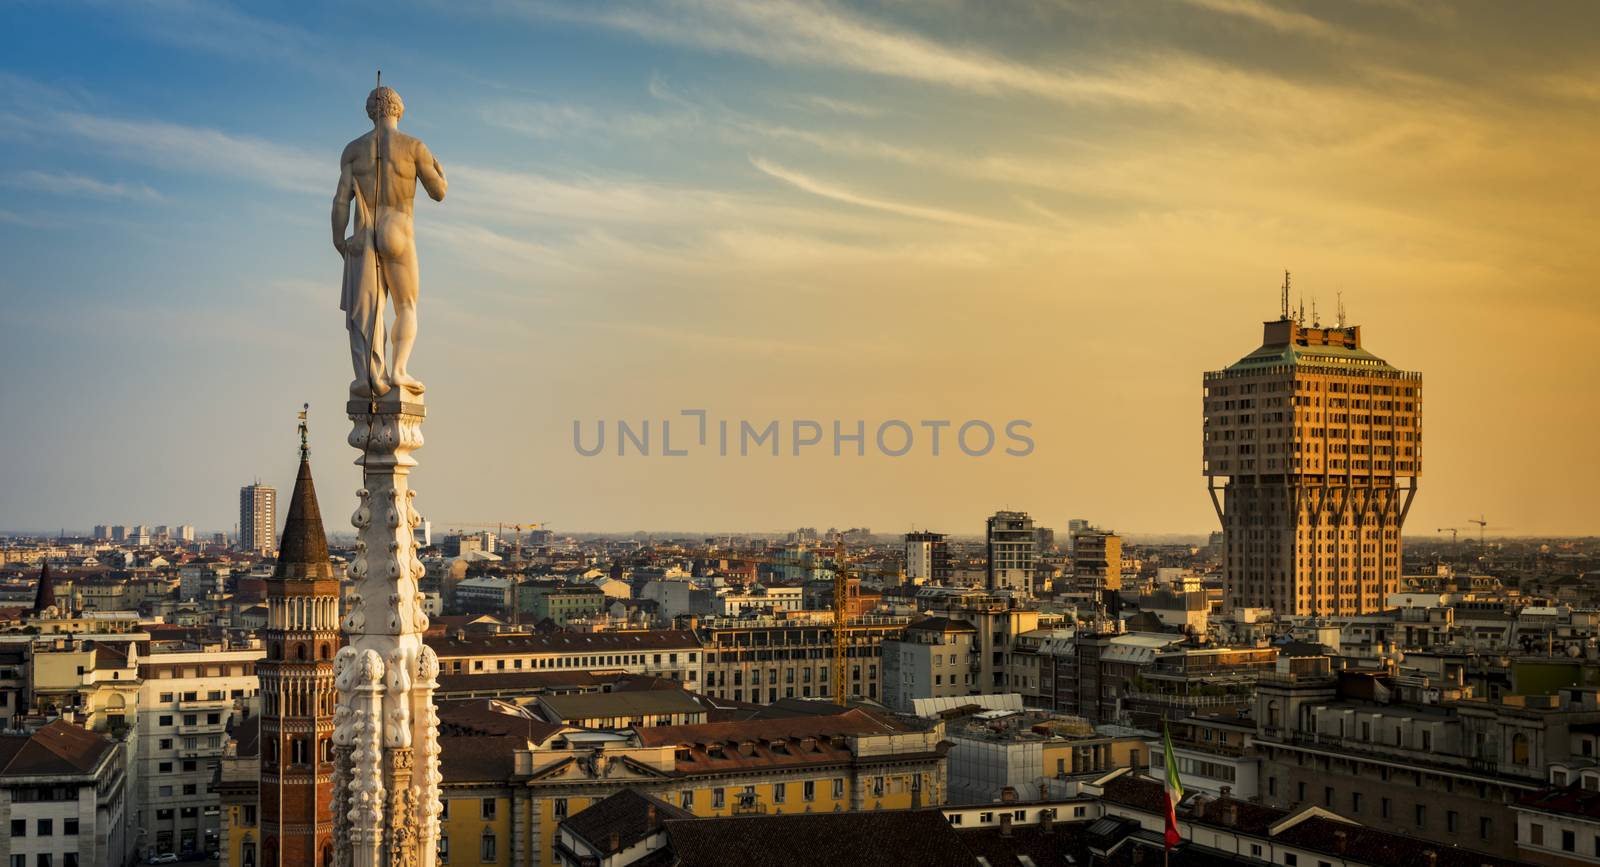 Skyline of Milan, Italy at sunset. View from the Roof Terrance of Duomo Di Milano.